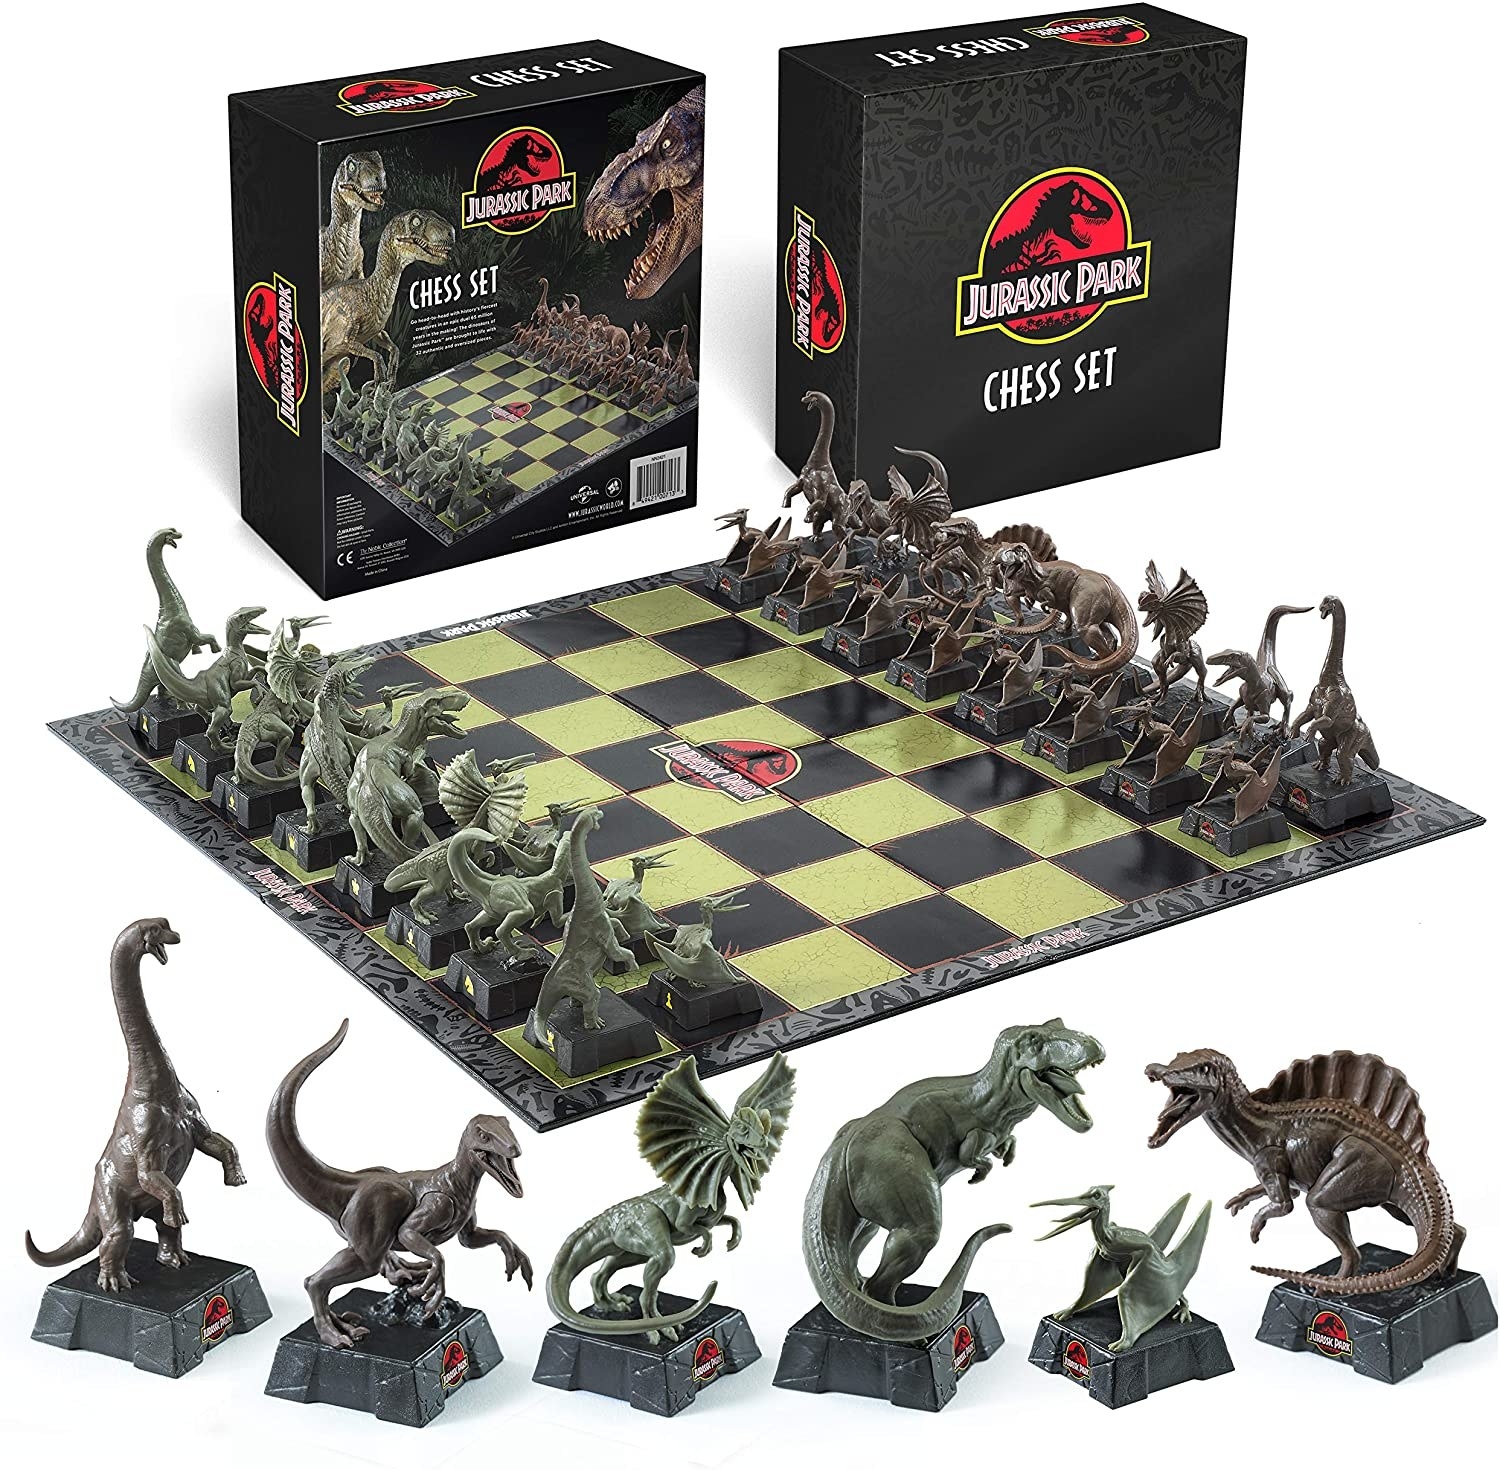 Green and black chessboard with dinosaur-shaped chess pieces and in front of a &quot;Jurassic Park&quot; chess box